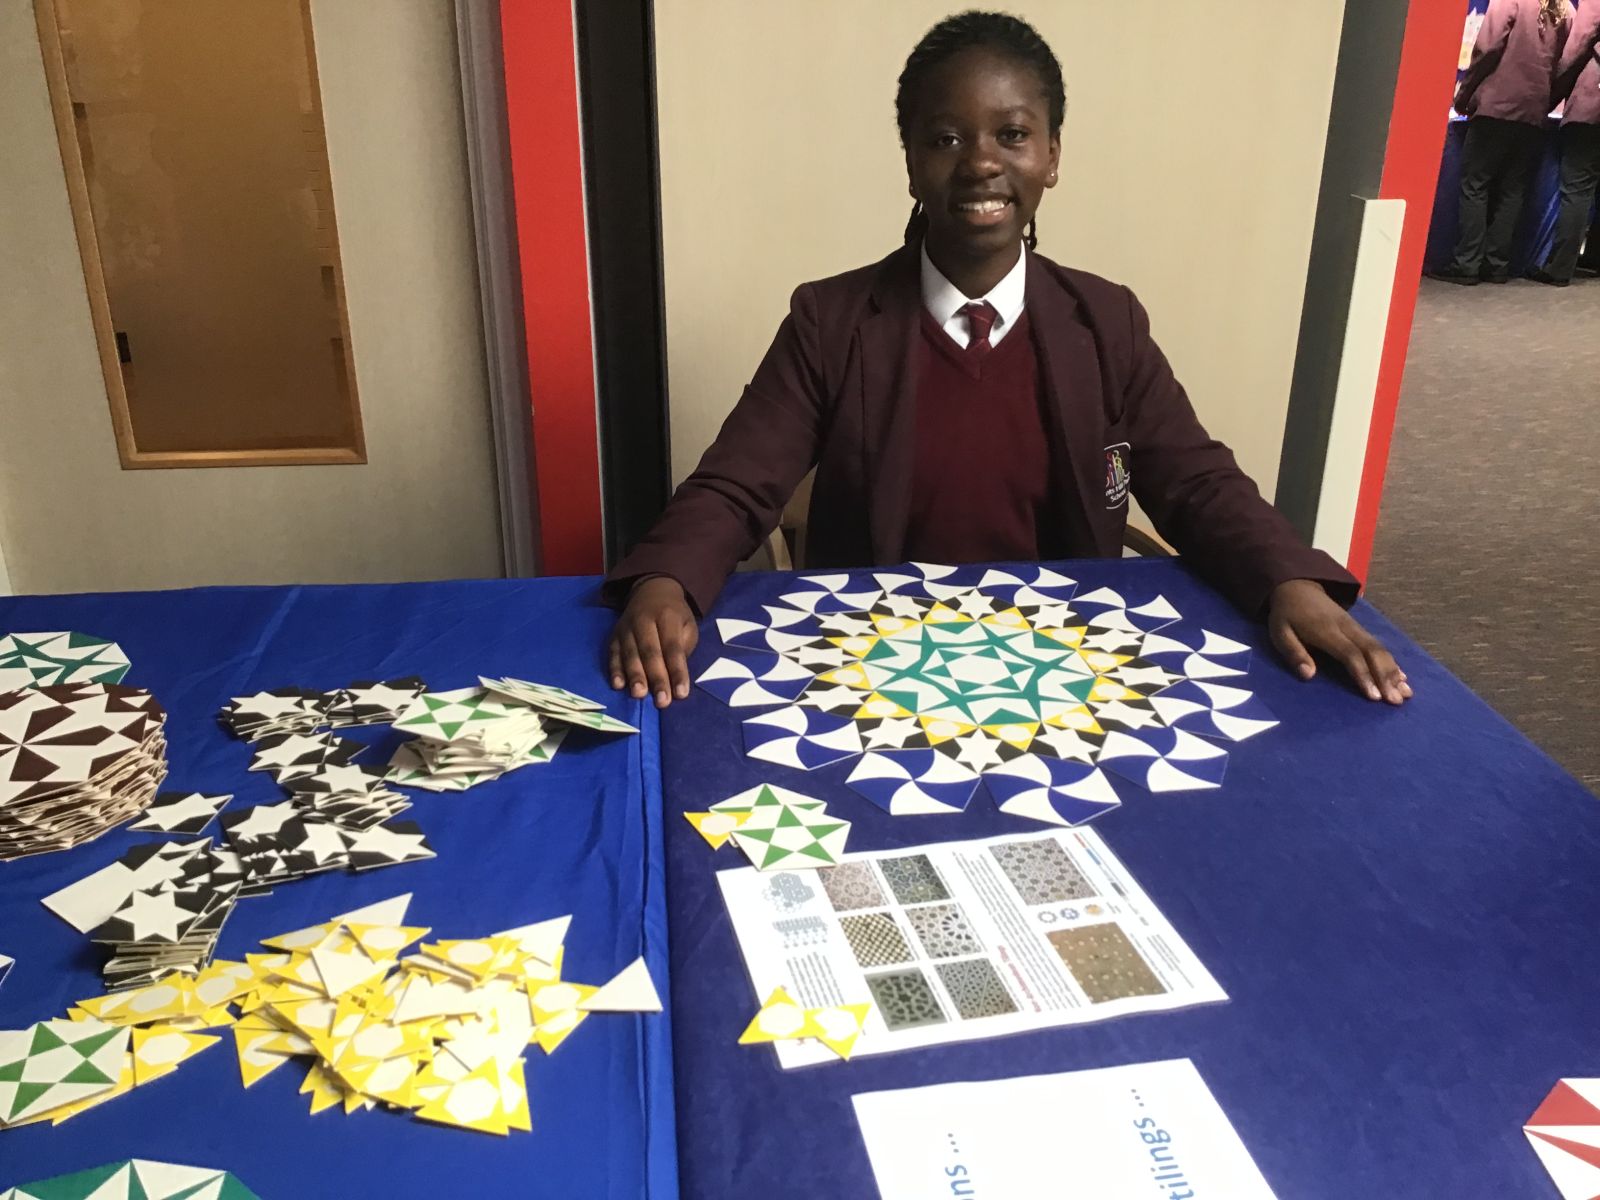 A young person sits behind a table of tiles